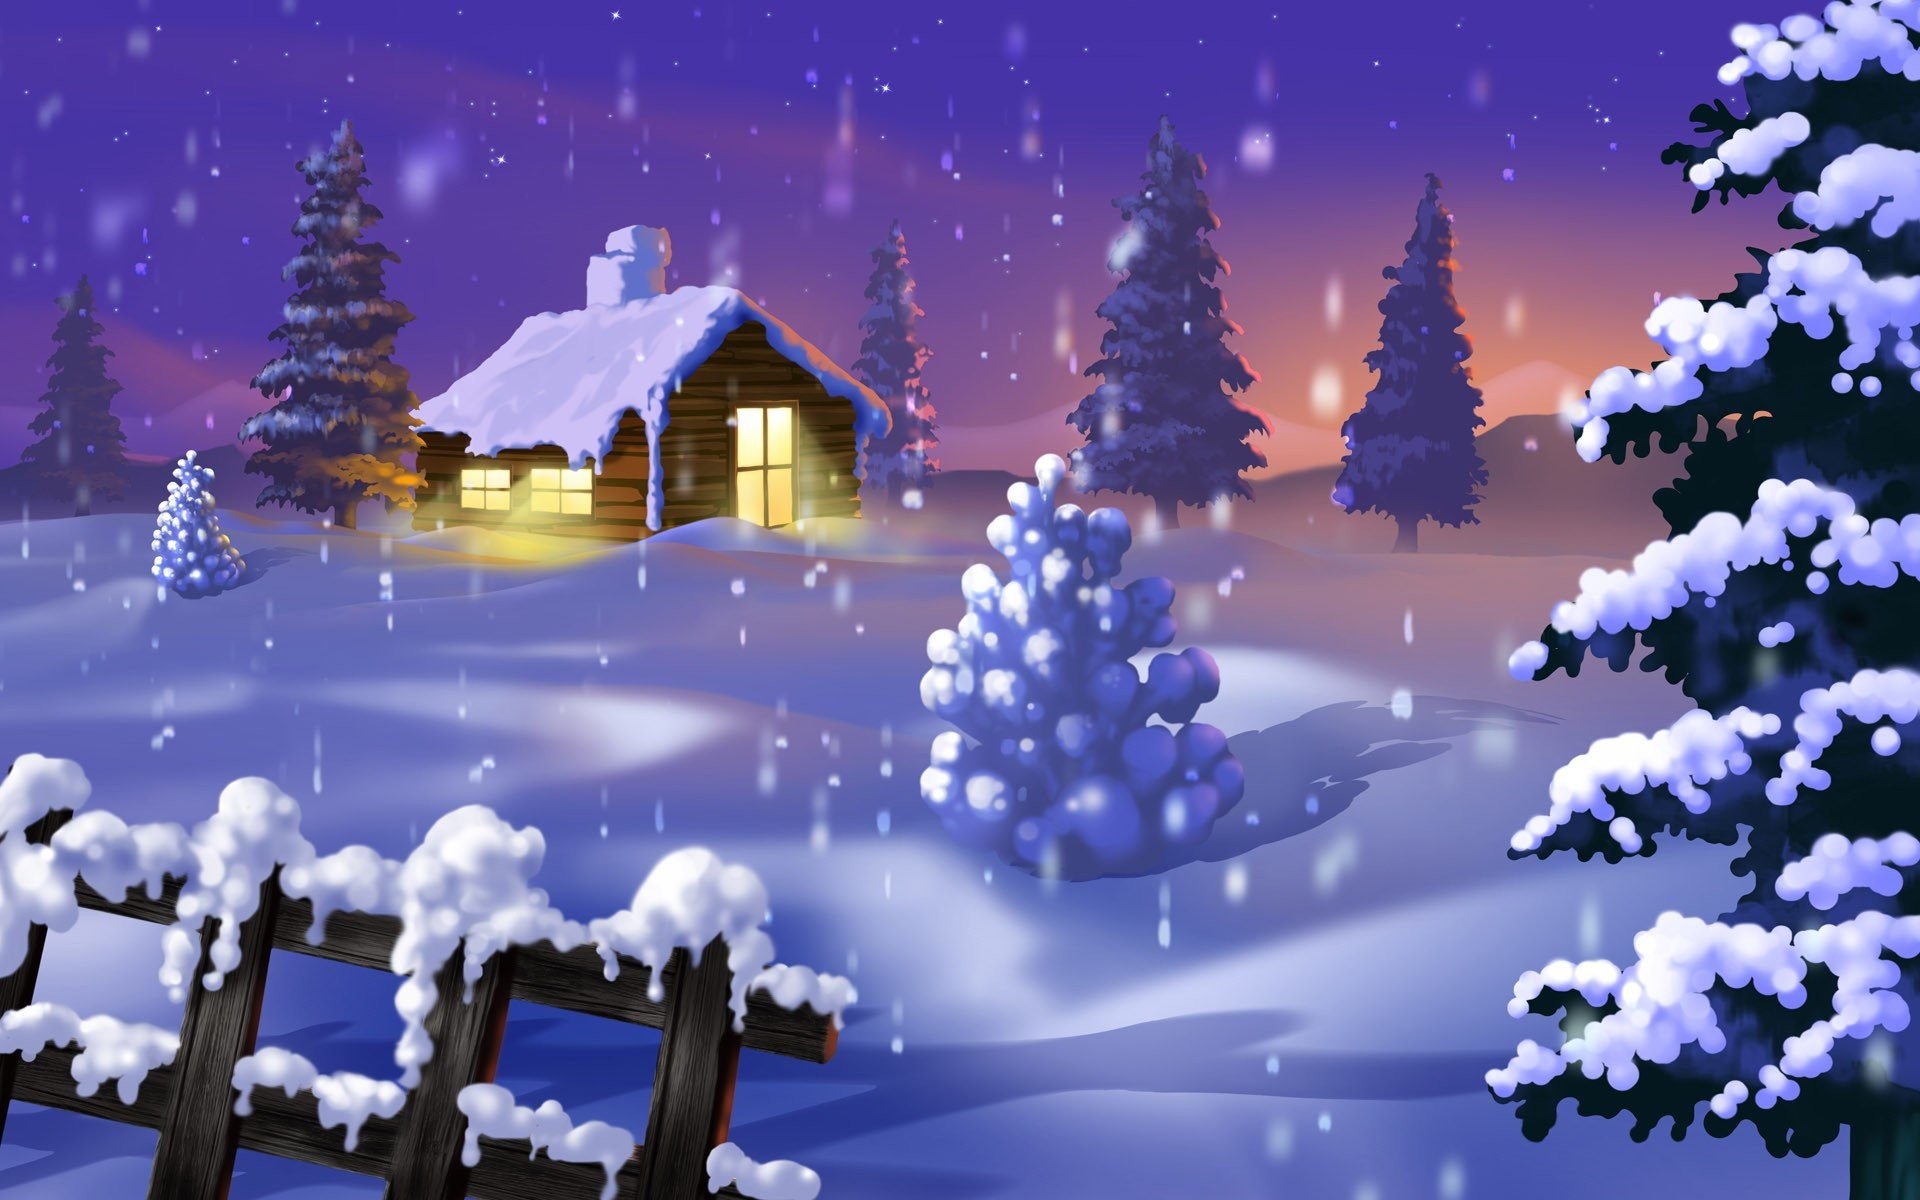 Snowy Christmas Scenes Wallpaper (48+ images)